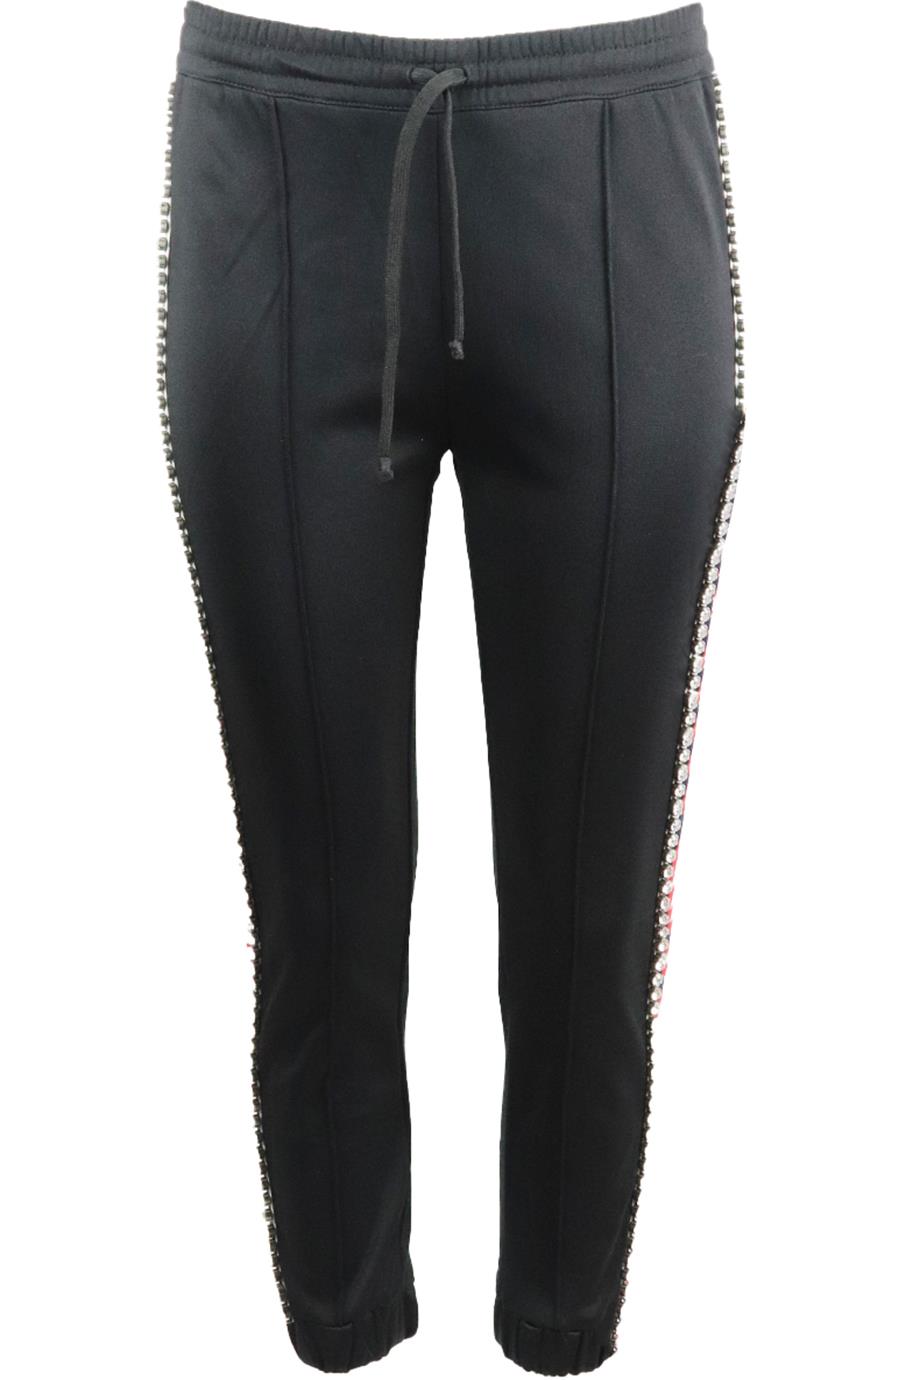 GUCCI CRYSTAL EMBELLISHED TECHNO JERSEY TRACK PANTS SMALL